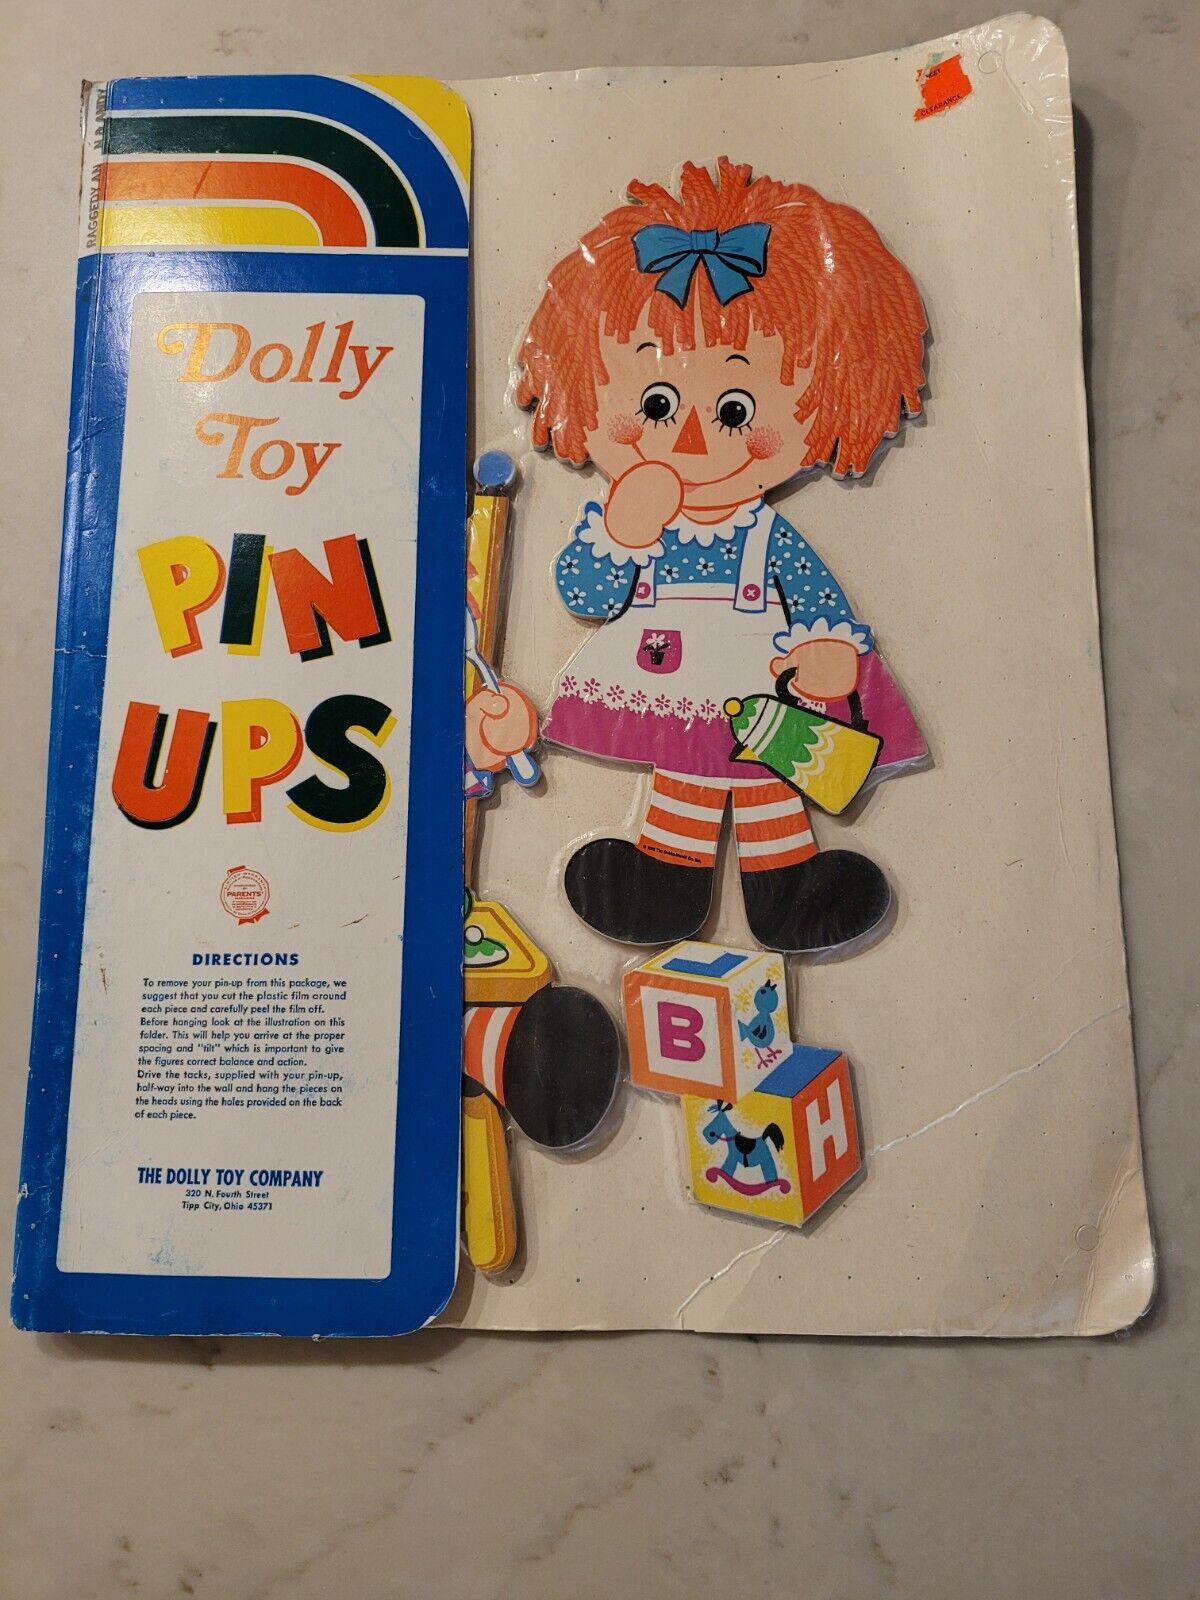 Vintage Raggedy Ann And Andy Dolly Toy Company Pin Ups